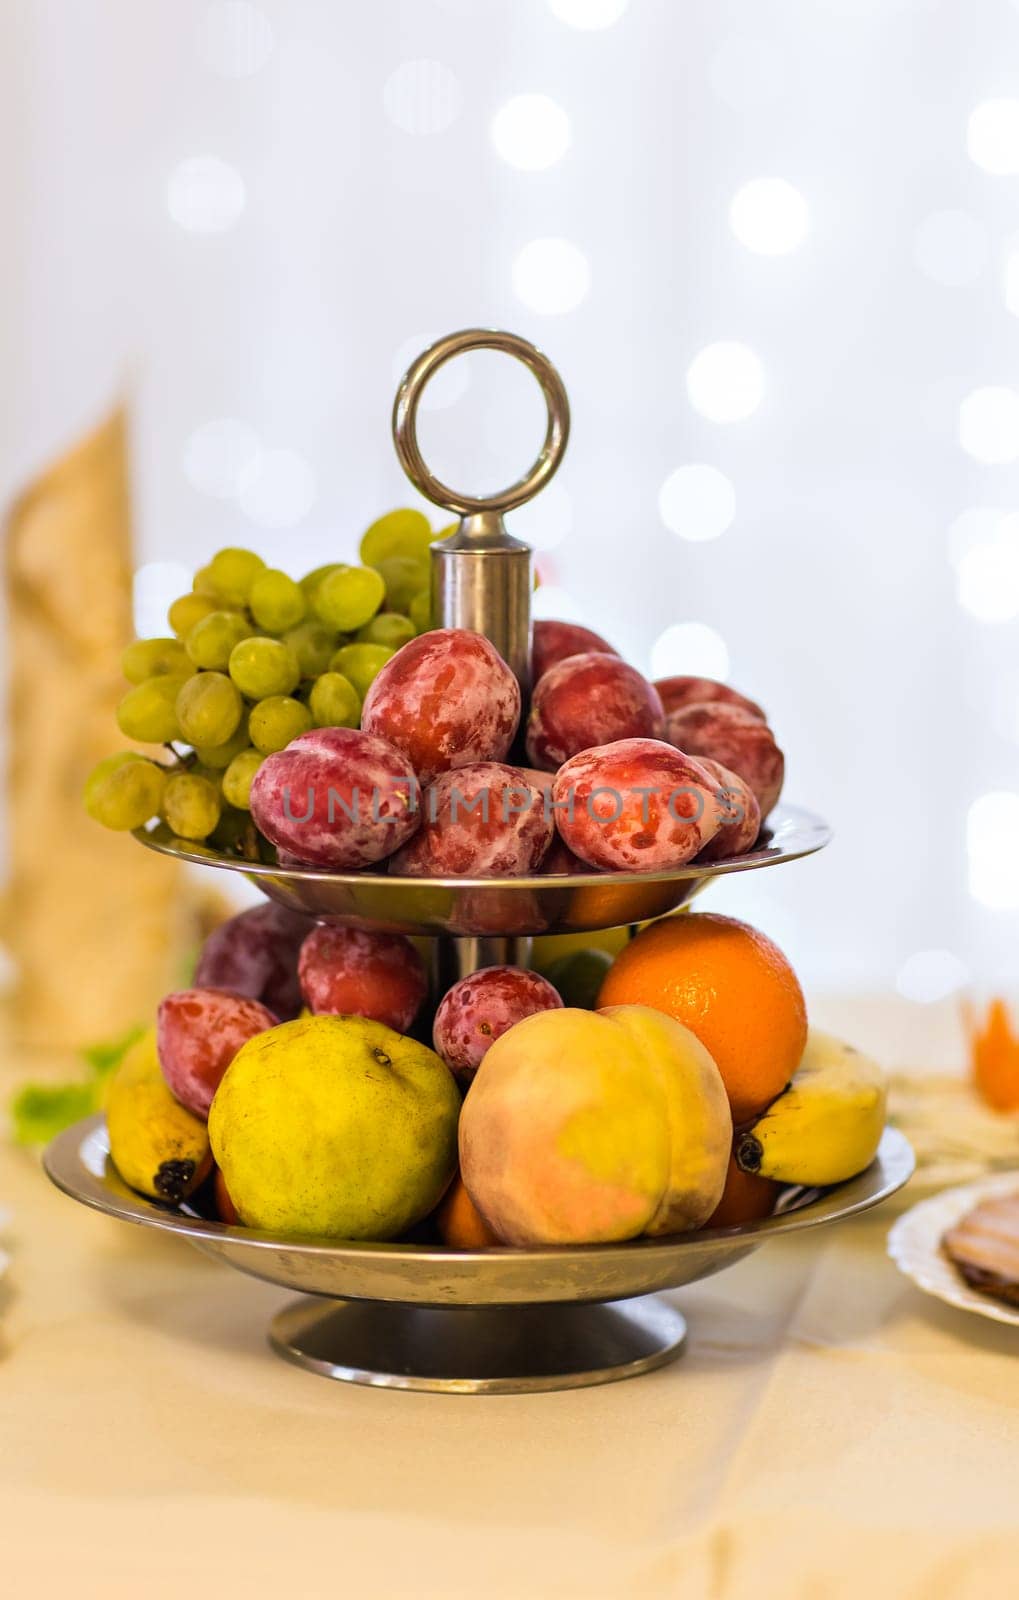 Fresh fruit party plate. dish for the festive table